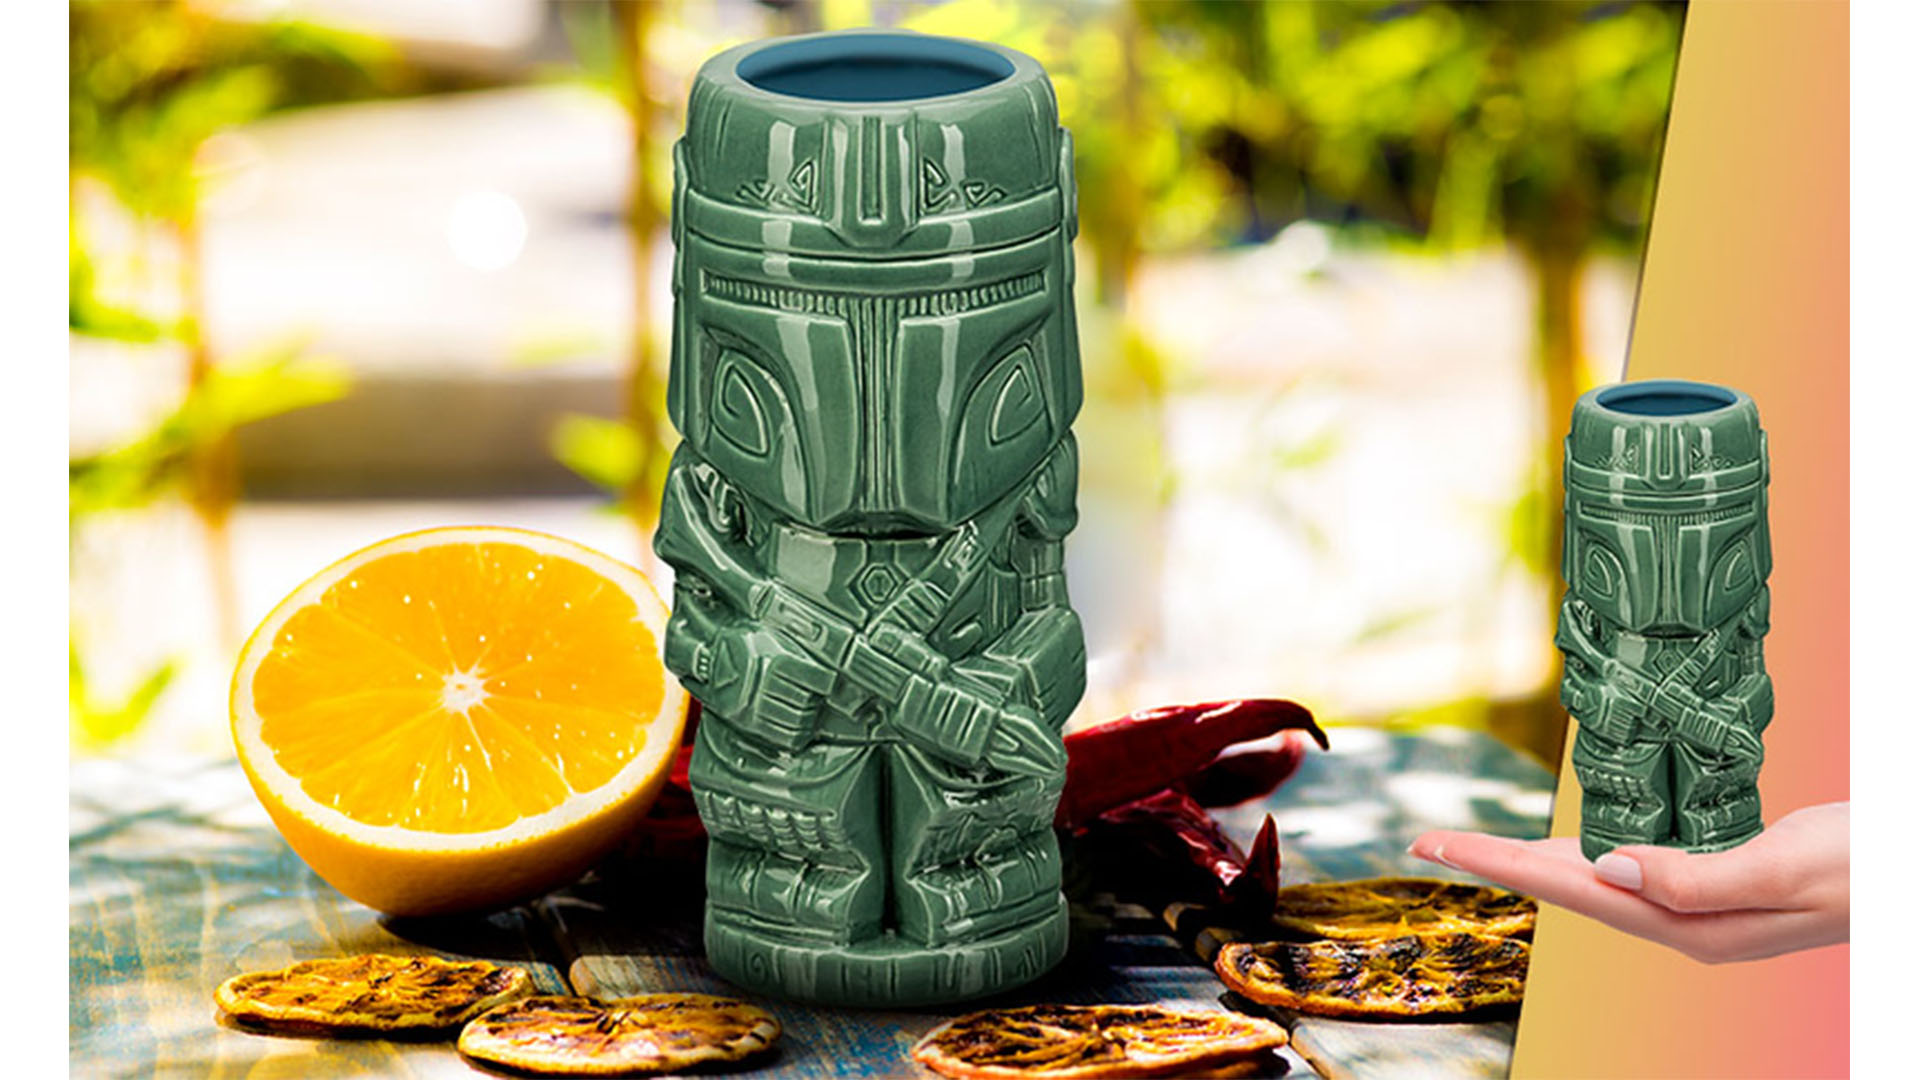 Two images of a green Mandalorian Geek Tiki - one image of the Geek Tiki in use, and in a hand to show scale.